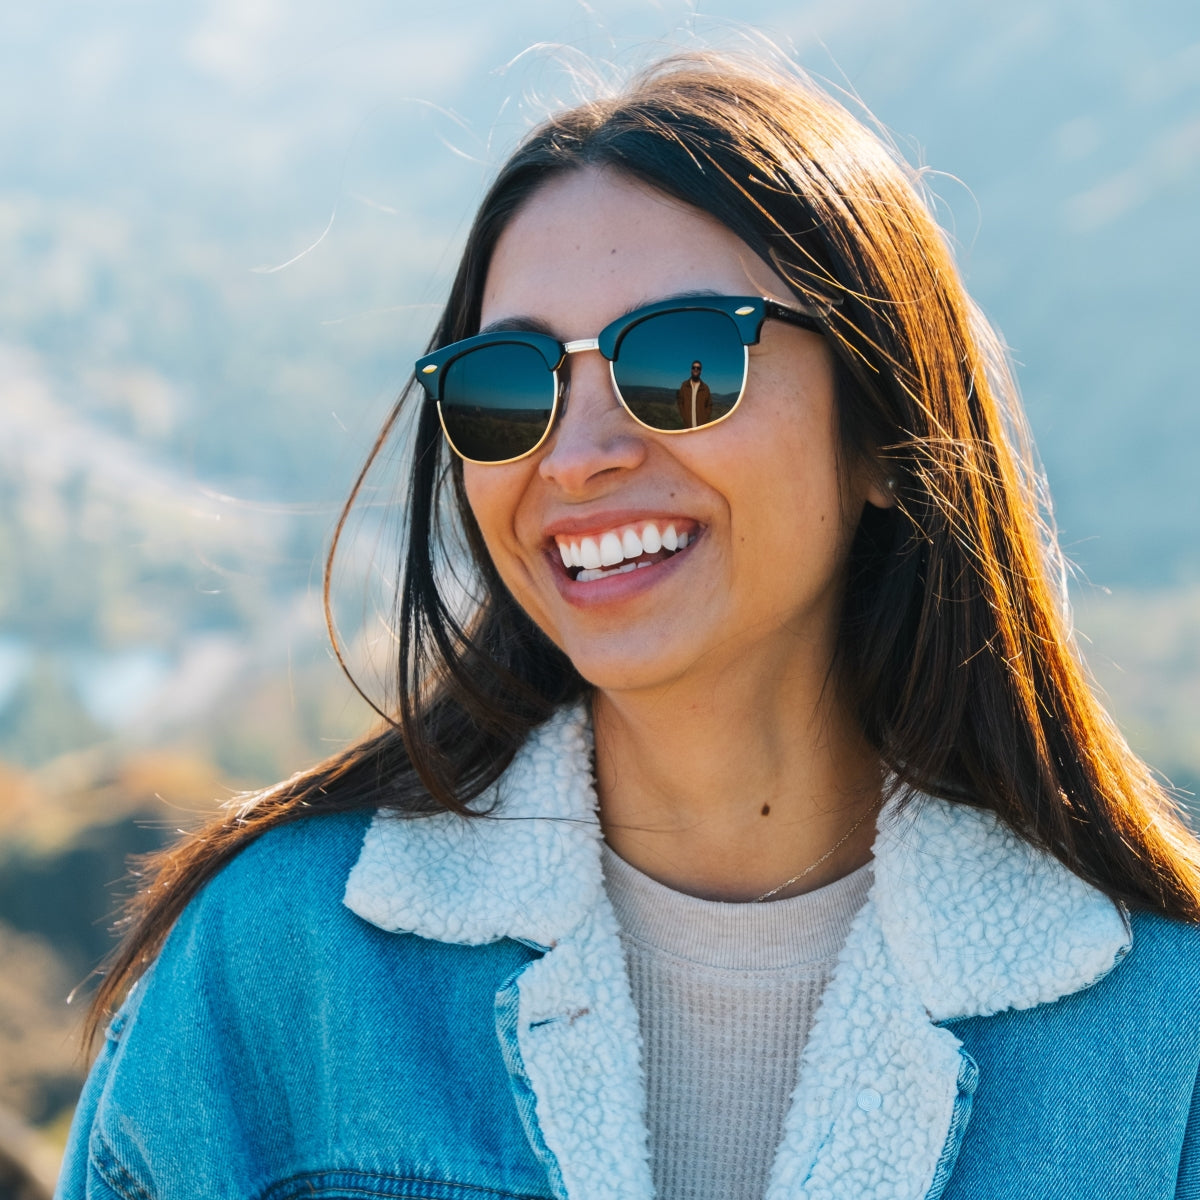 Tangle Free Oakmont - Original Polarized Sunglasses | Gloss Black Sunglasses | Best Christmas Gifts | Gifts for The Holidays | Unique Gifts for